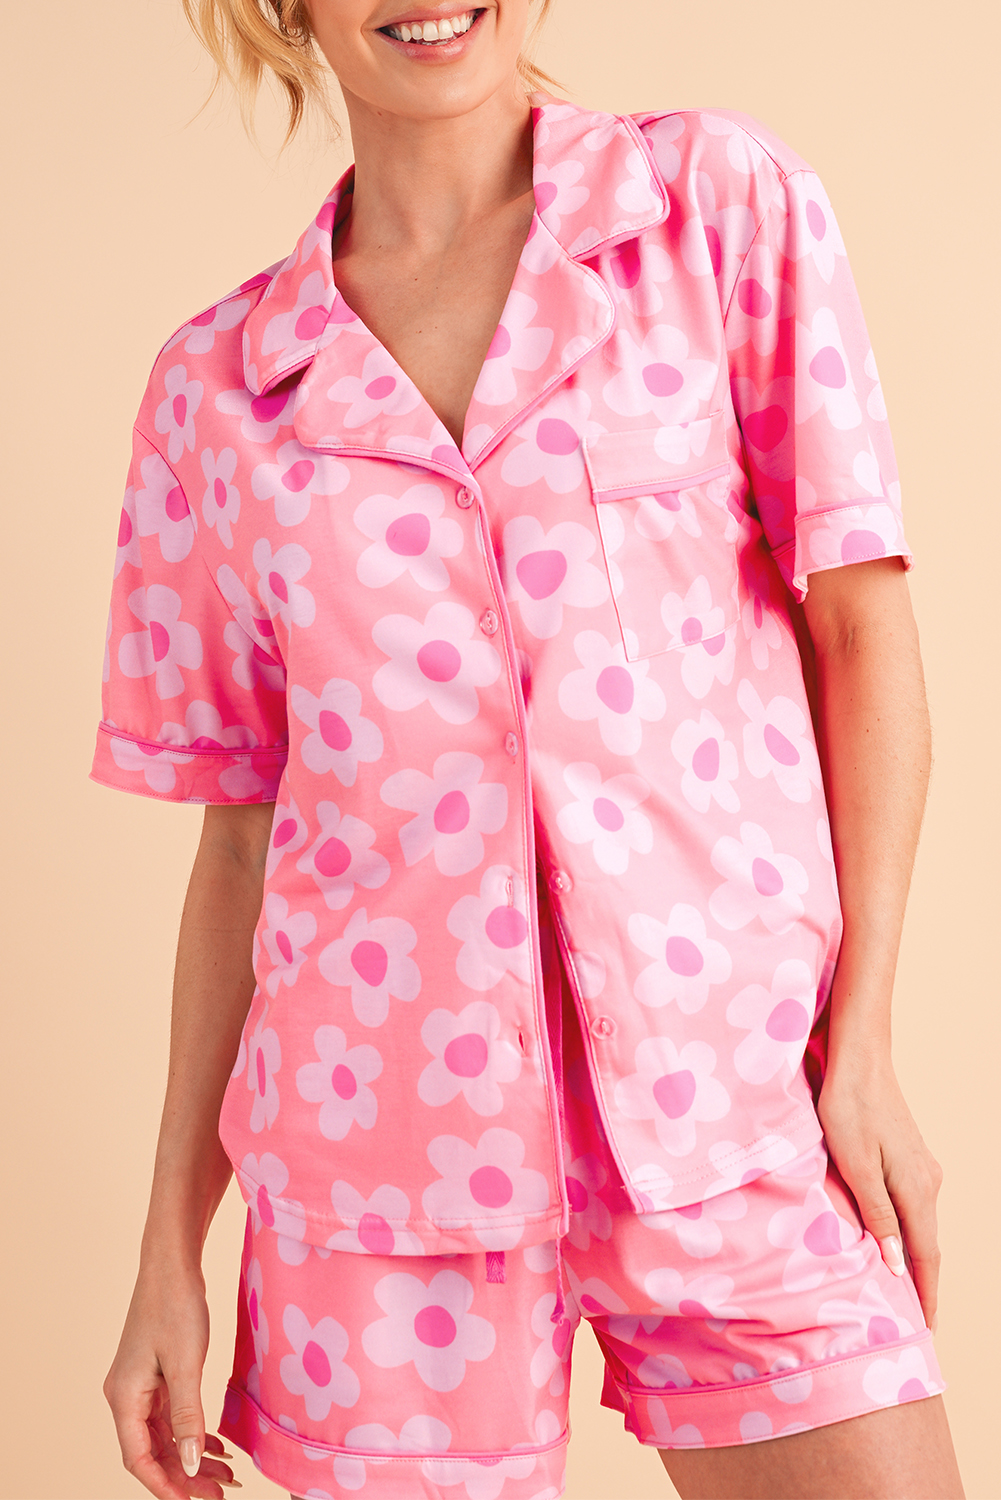 Shewin Wholesale Boutique Pink 60s FLOWER Print Buttoned Shirt and Drawstring Waist Pajama Set